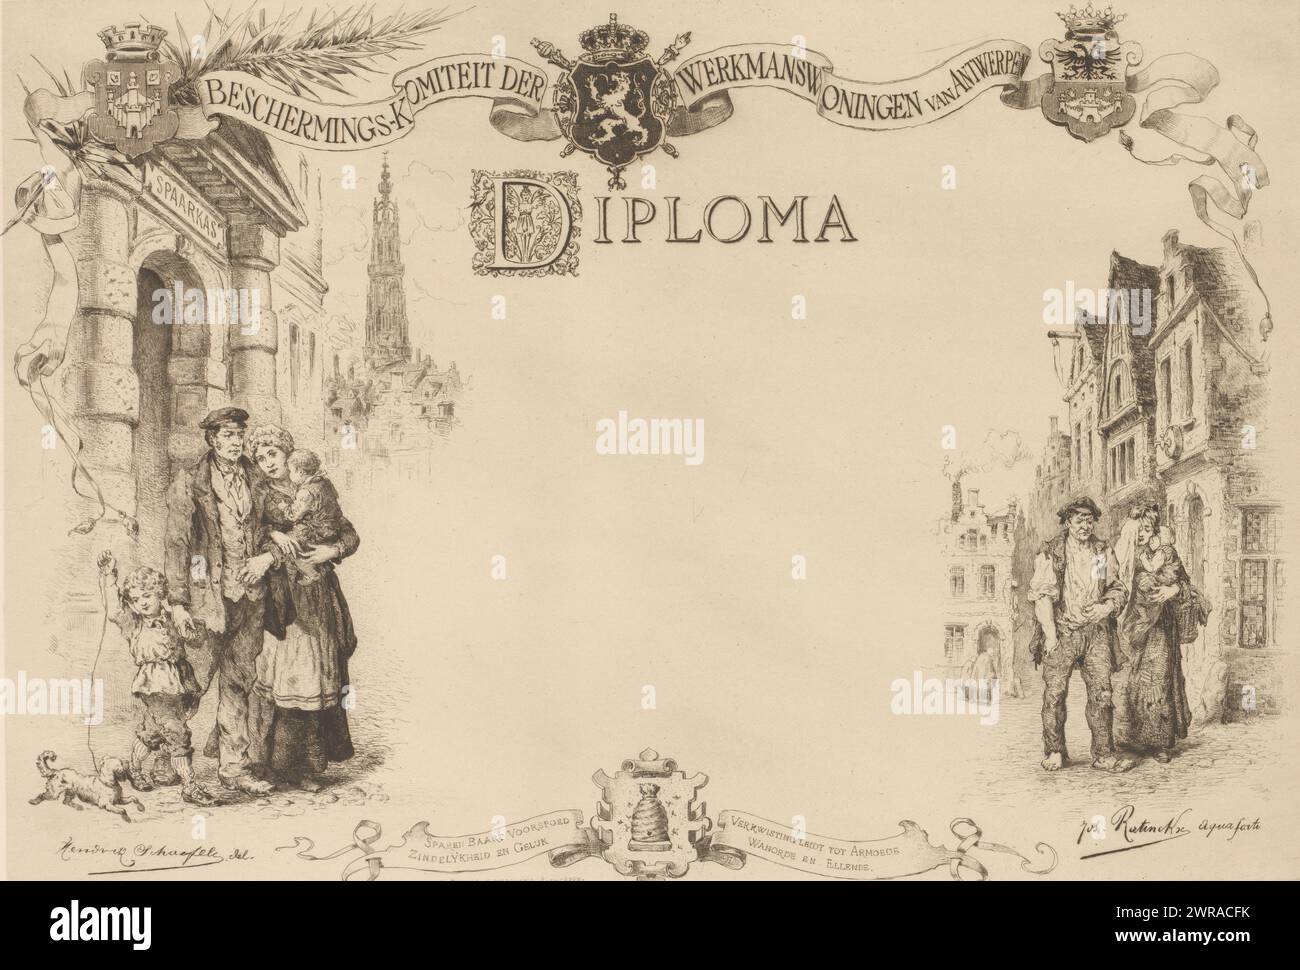 Diploma with a family on the street on the left and right, Antwerp Protection Committee for Working Men's Homes; diploma (title on object), The performance refers to the benefits of saving. The family on the left at the savings bank is doing well, while the family on the right lives in poverty. At the bottom is the caption: Saving brings prosperity, meaning and happiness; prodigality leads to poverty disorder and misery., print maker: Jos Ratinckx, after drawing by: Henri François Schaefels, printer: F. Michiels, Antwerp, 1870 - 1914, paper, etching, retroussage Stock Photo